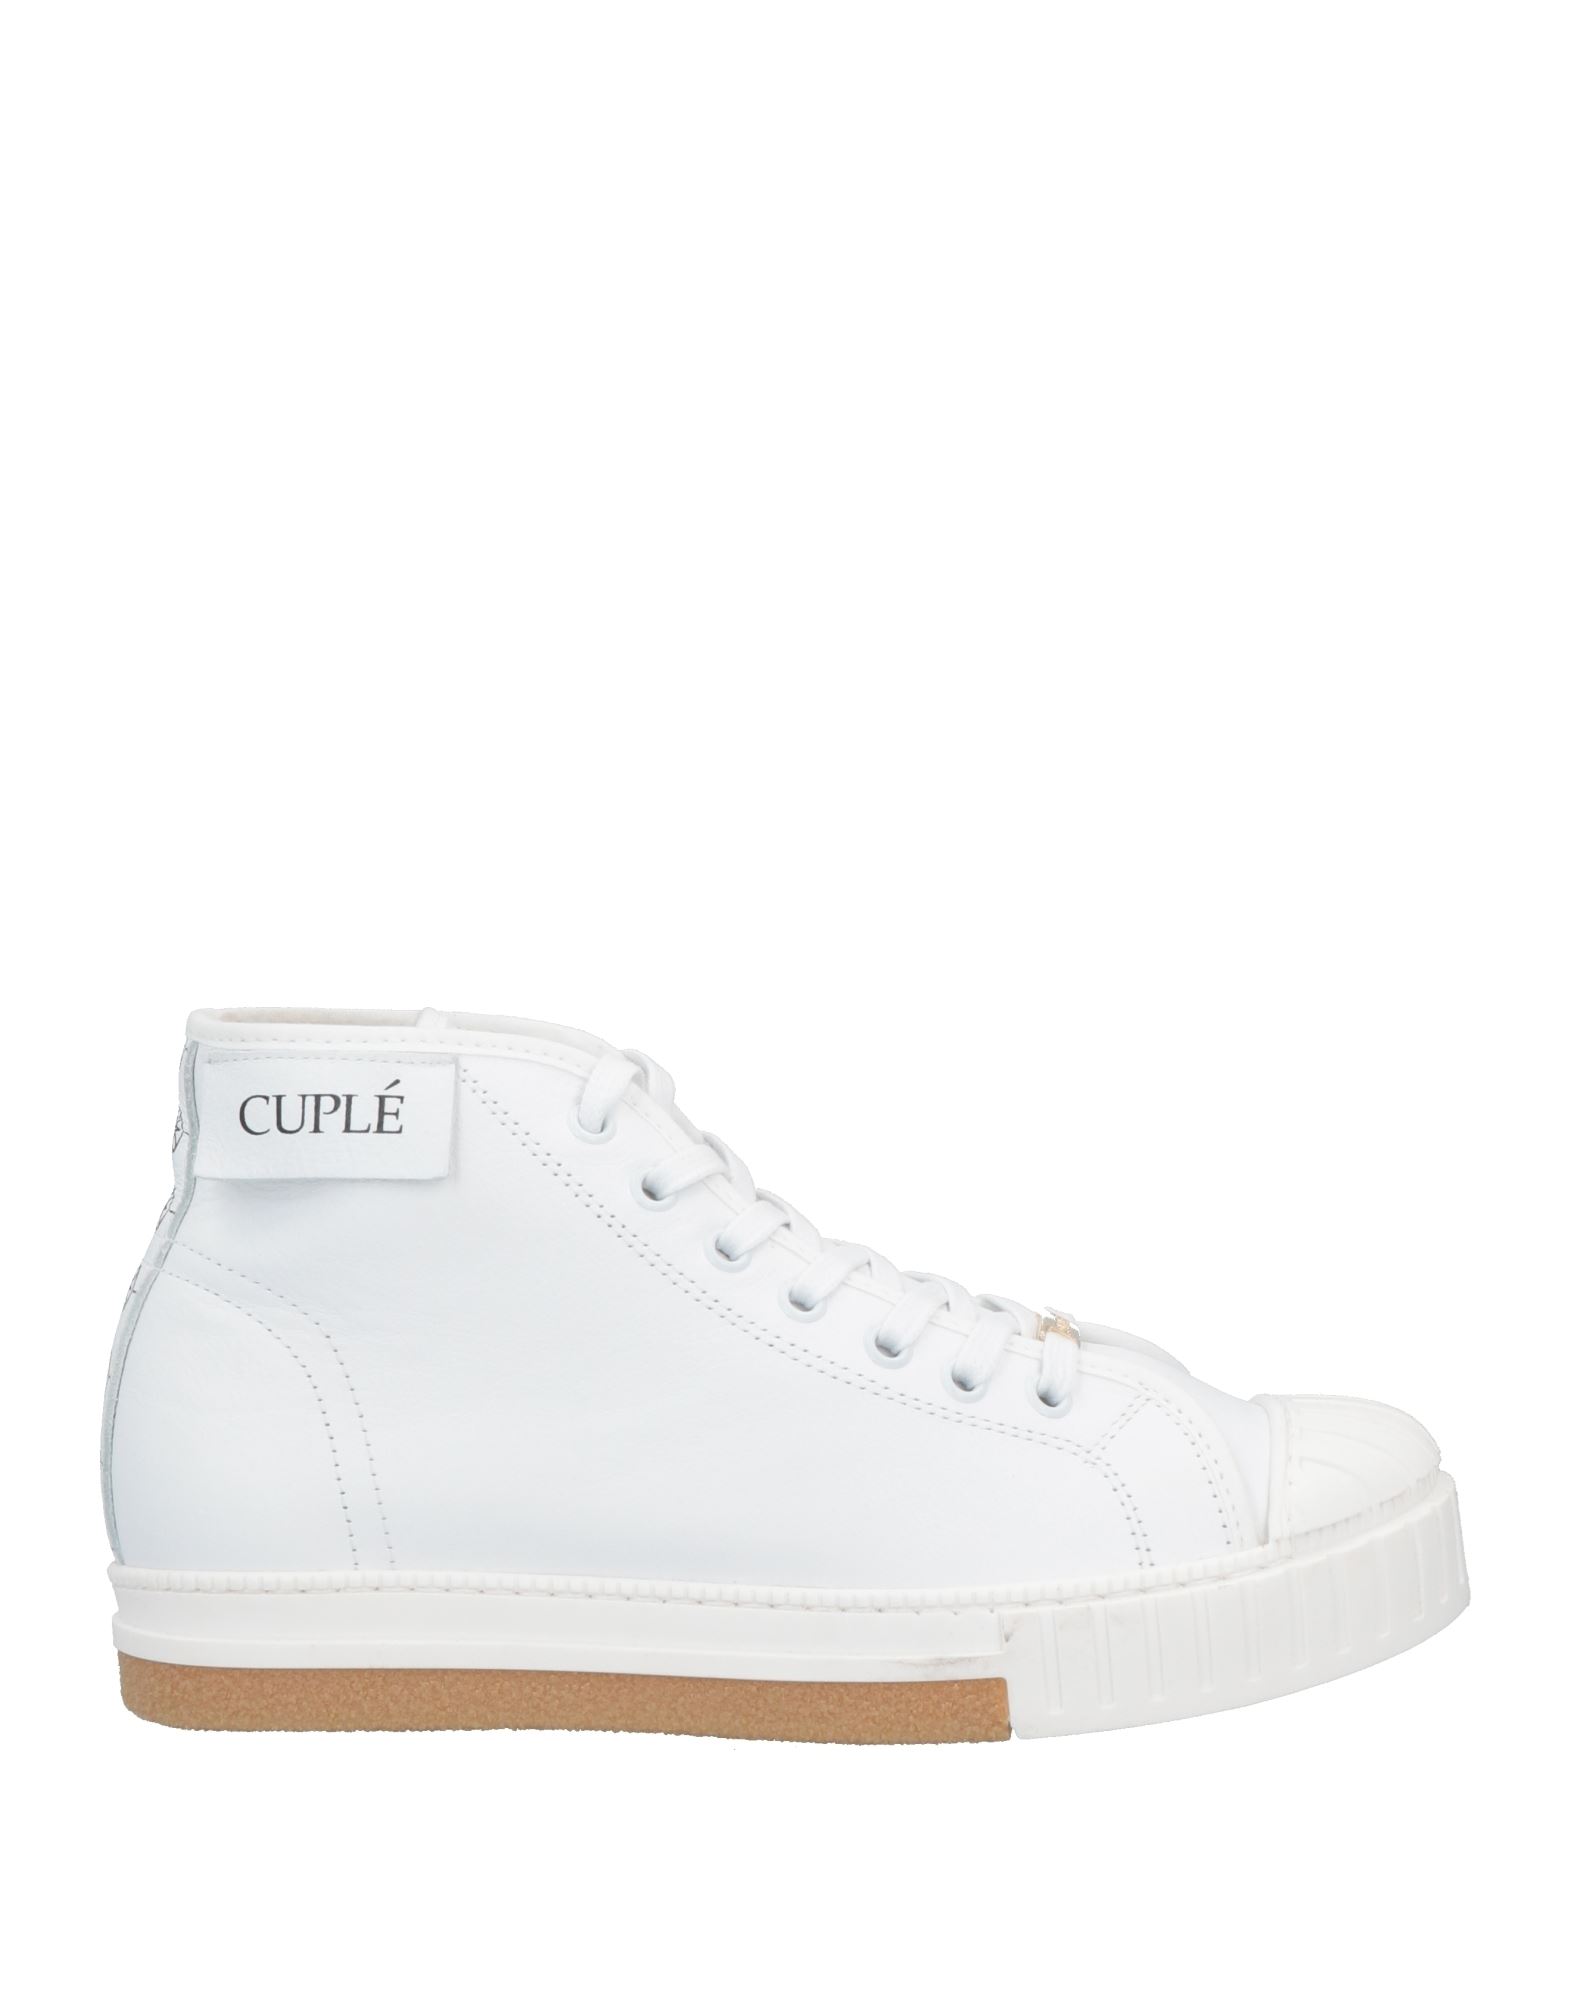 Cuplé Sneakers In White